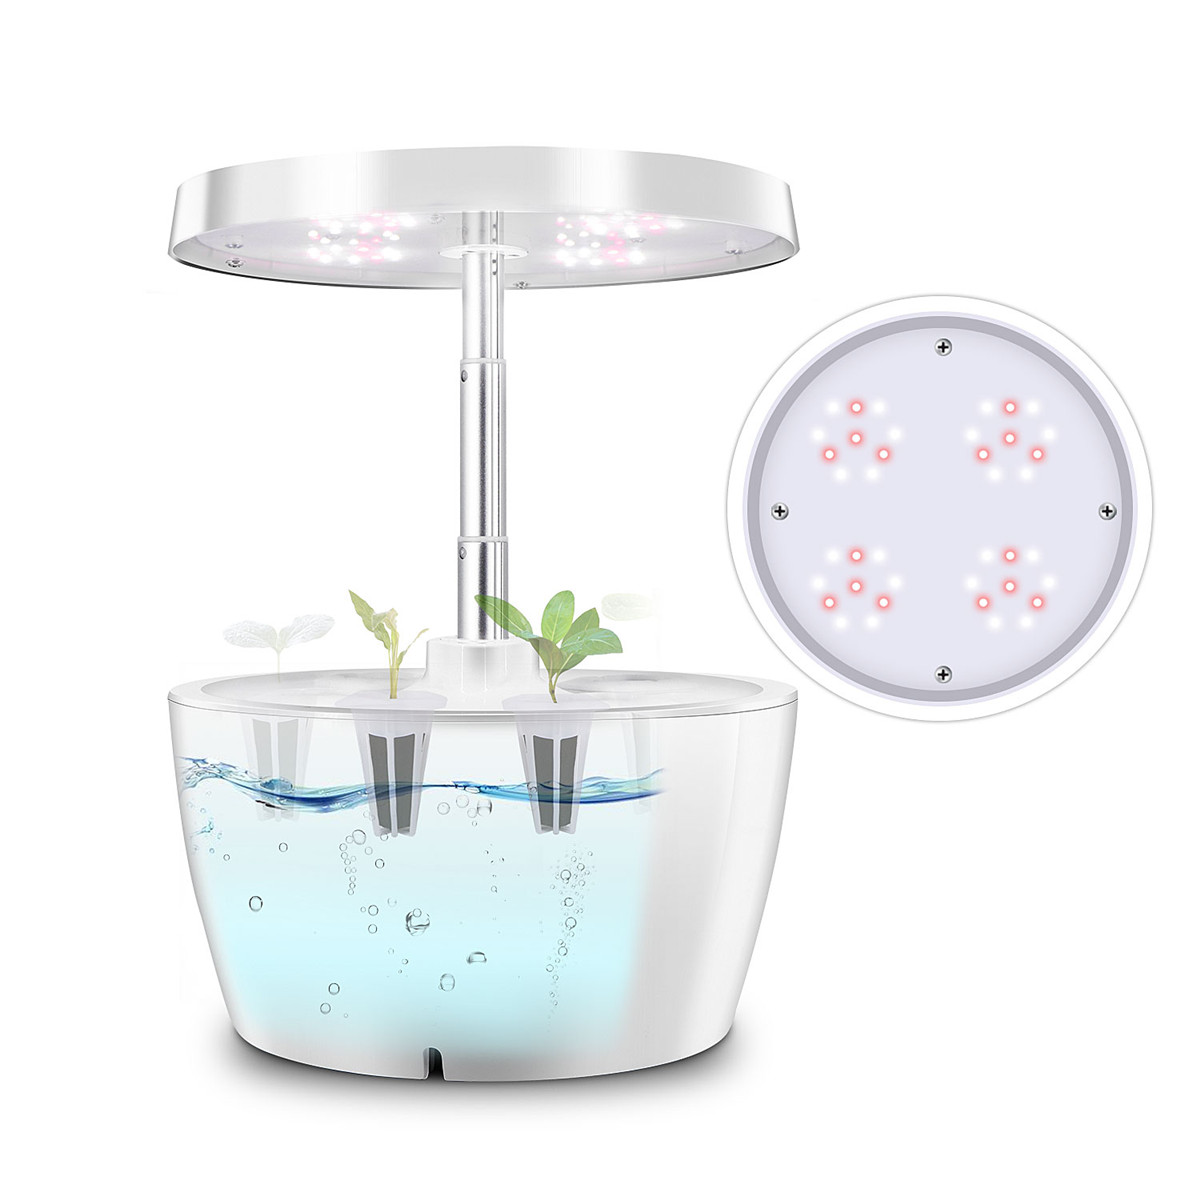 IGS-01-Indoor-Plant-Hydroponics-Grow-light-Soilless-Cultivation-Plant-Grow-Light-Lamp-For-Plant-Indo-1576311-10